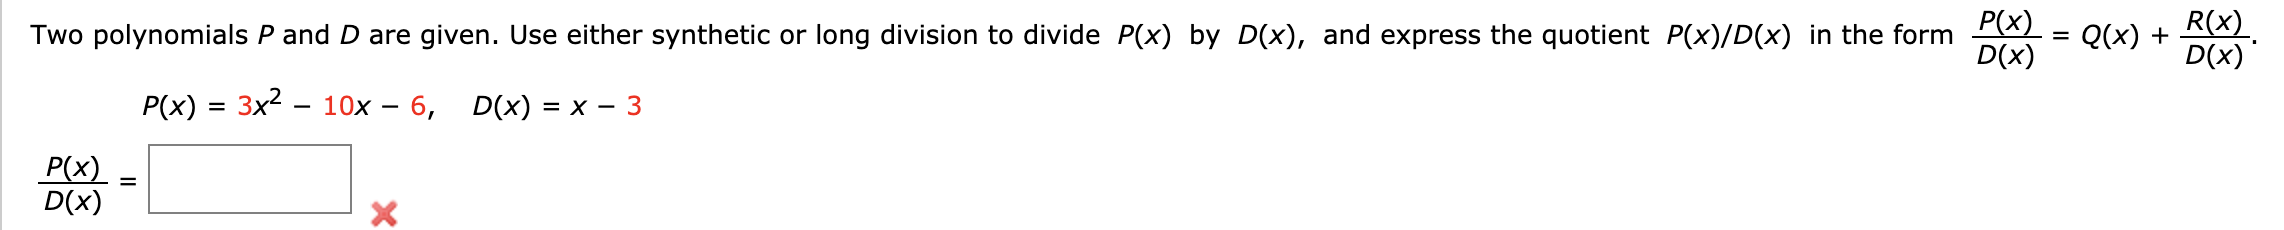 P(x)
D(x)
R(x)
D(x)
Two polynomials P and D are given. Use either synthetic or long division to divide P(x) by D(x), and express the quotient P(x)/D(x) in the form
Q(x)
=
10x 6,
P(x) 3x2
D(x)
= X 3
P(x)
D(x)
